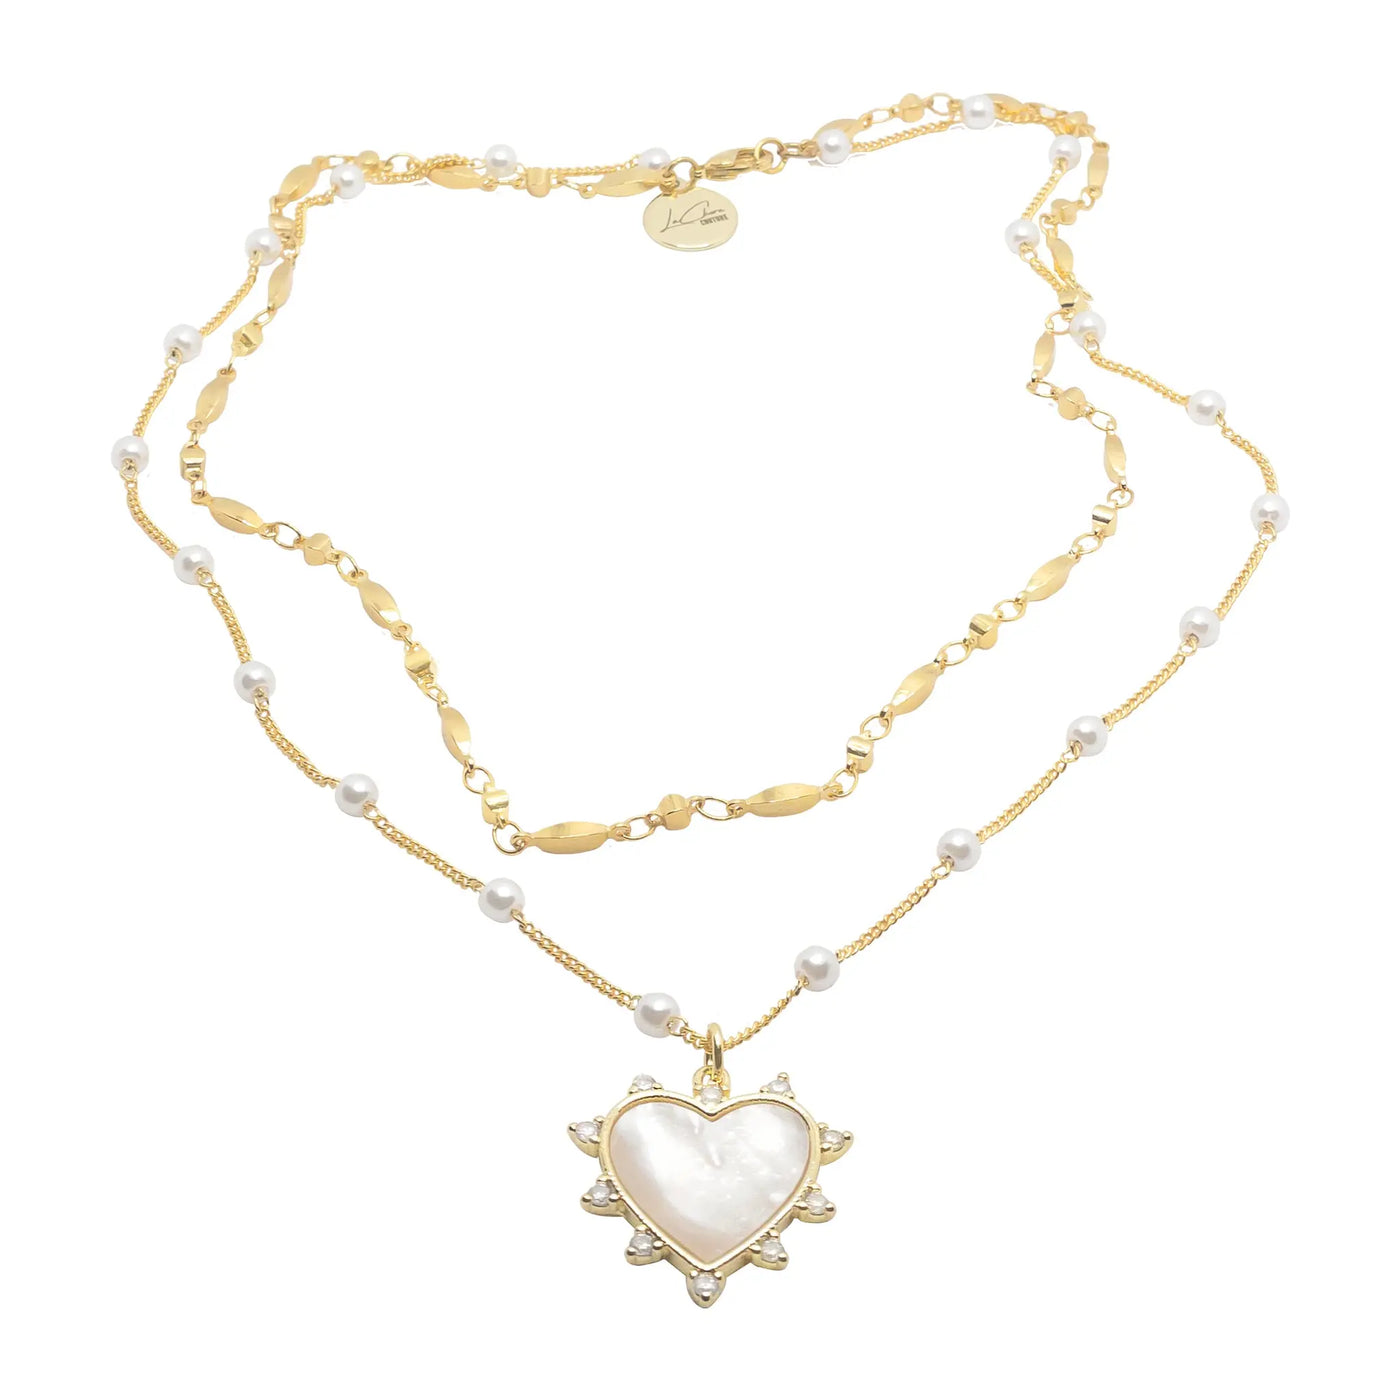 Lover Heart Necklace LaCkore Couture